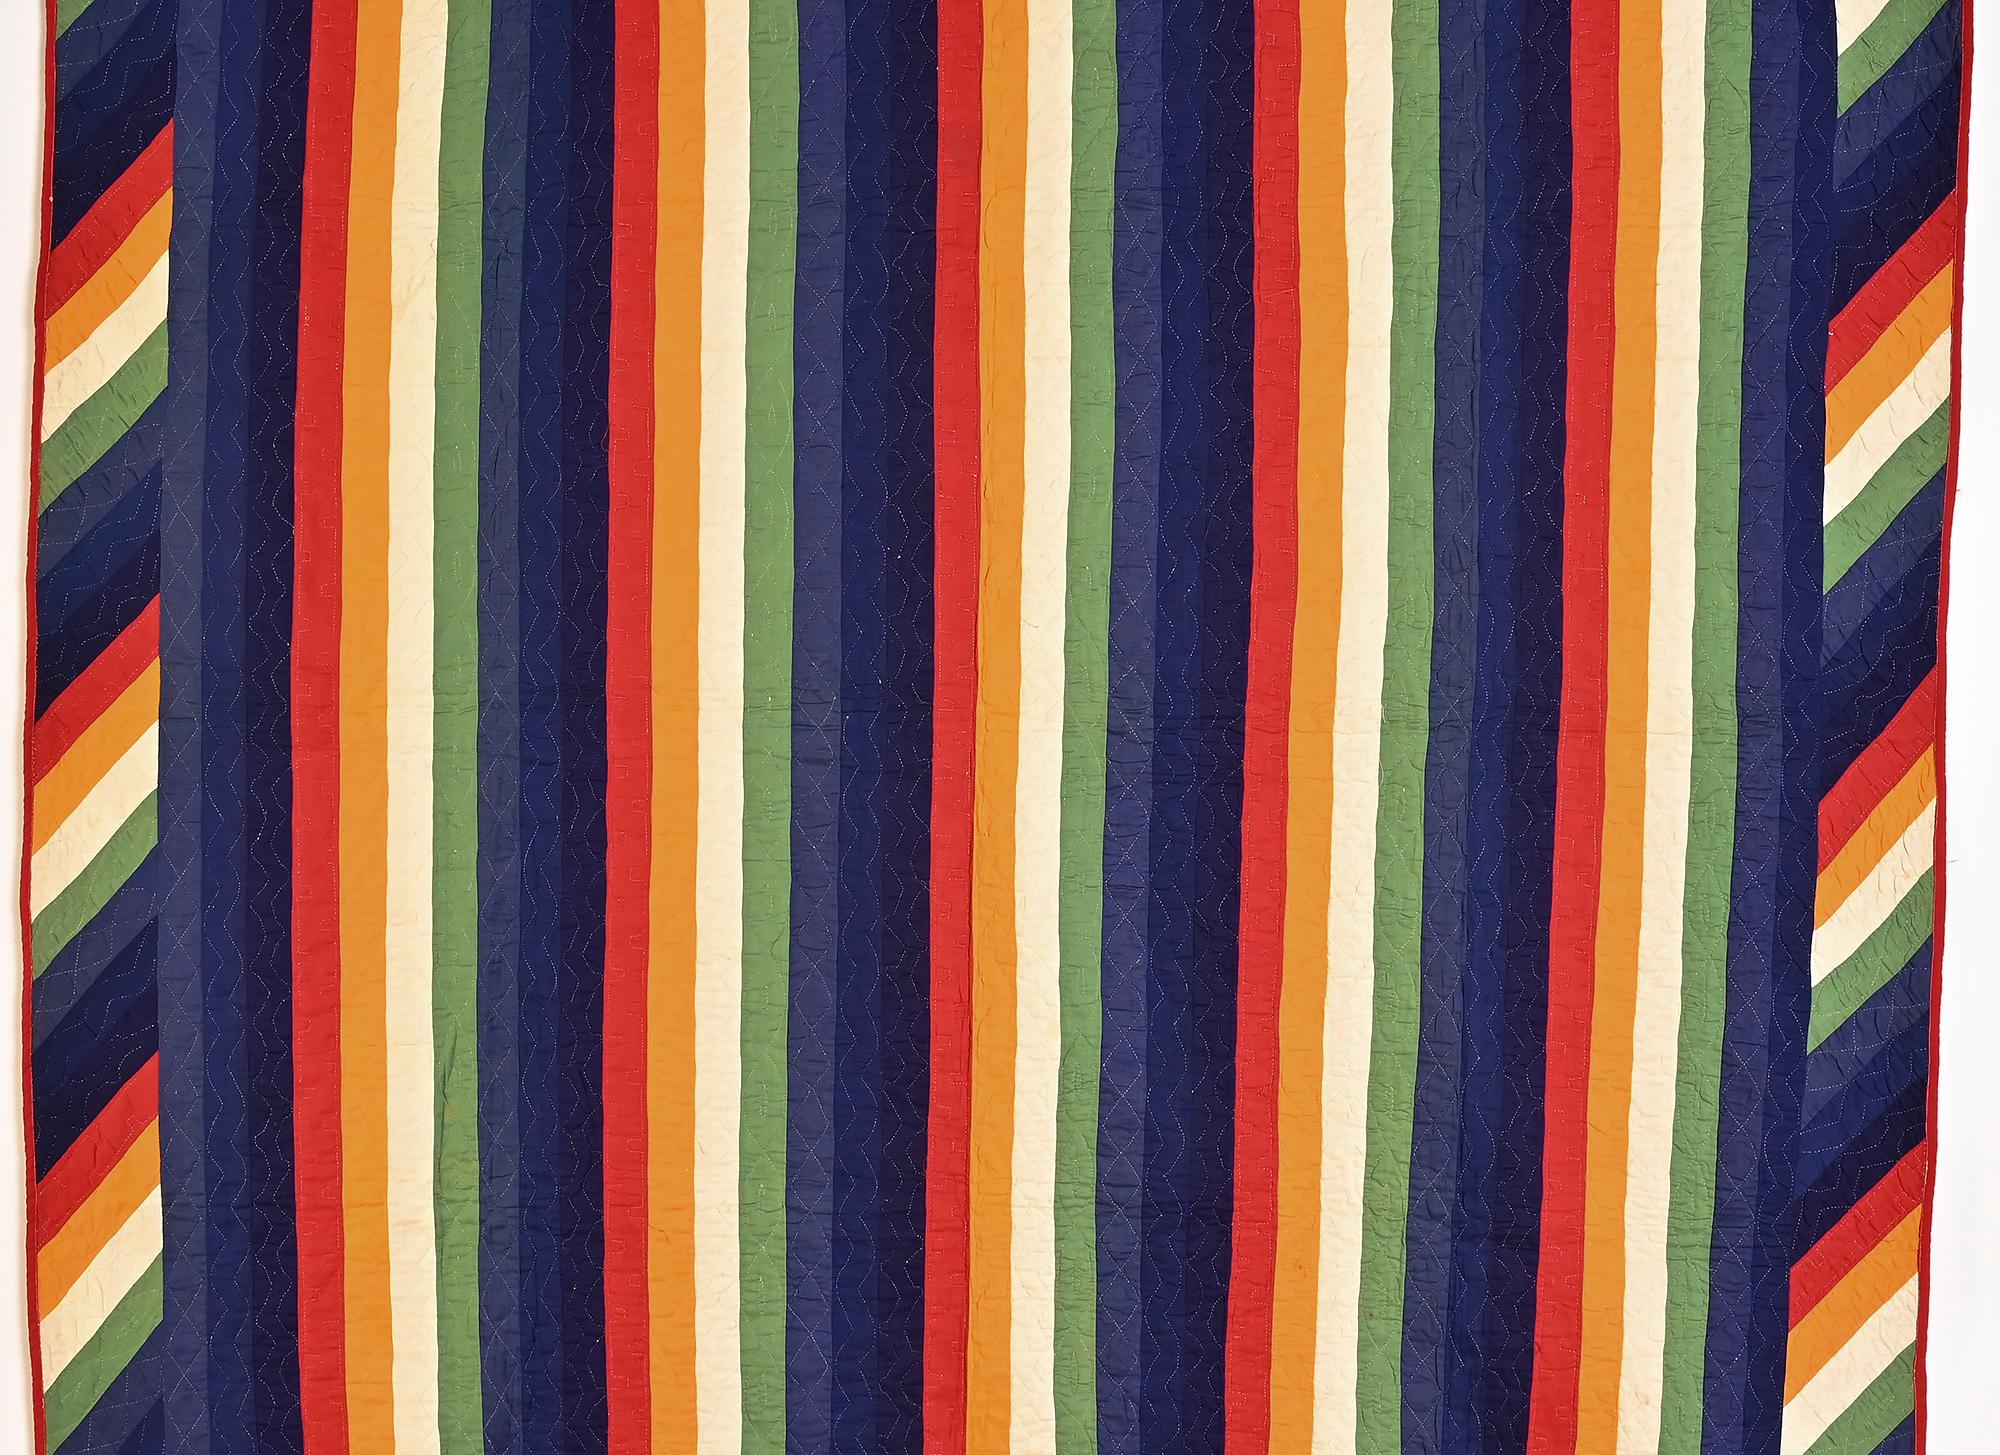 This striking Joseph's Coat quilt incorporates the features most desirable in this traditionally Mennonite pattern. Each color stripe has a different quilting pattern. The diagonal stripe border adds movement to the already bold design. What